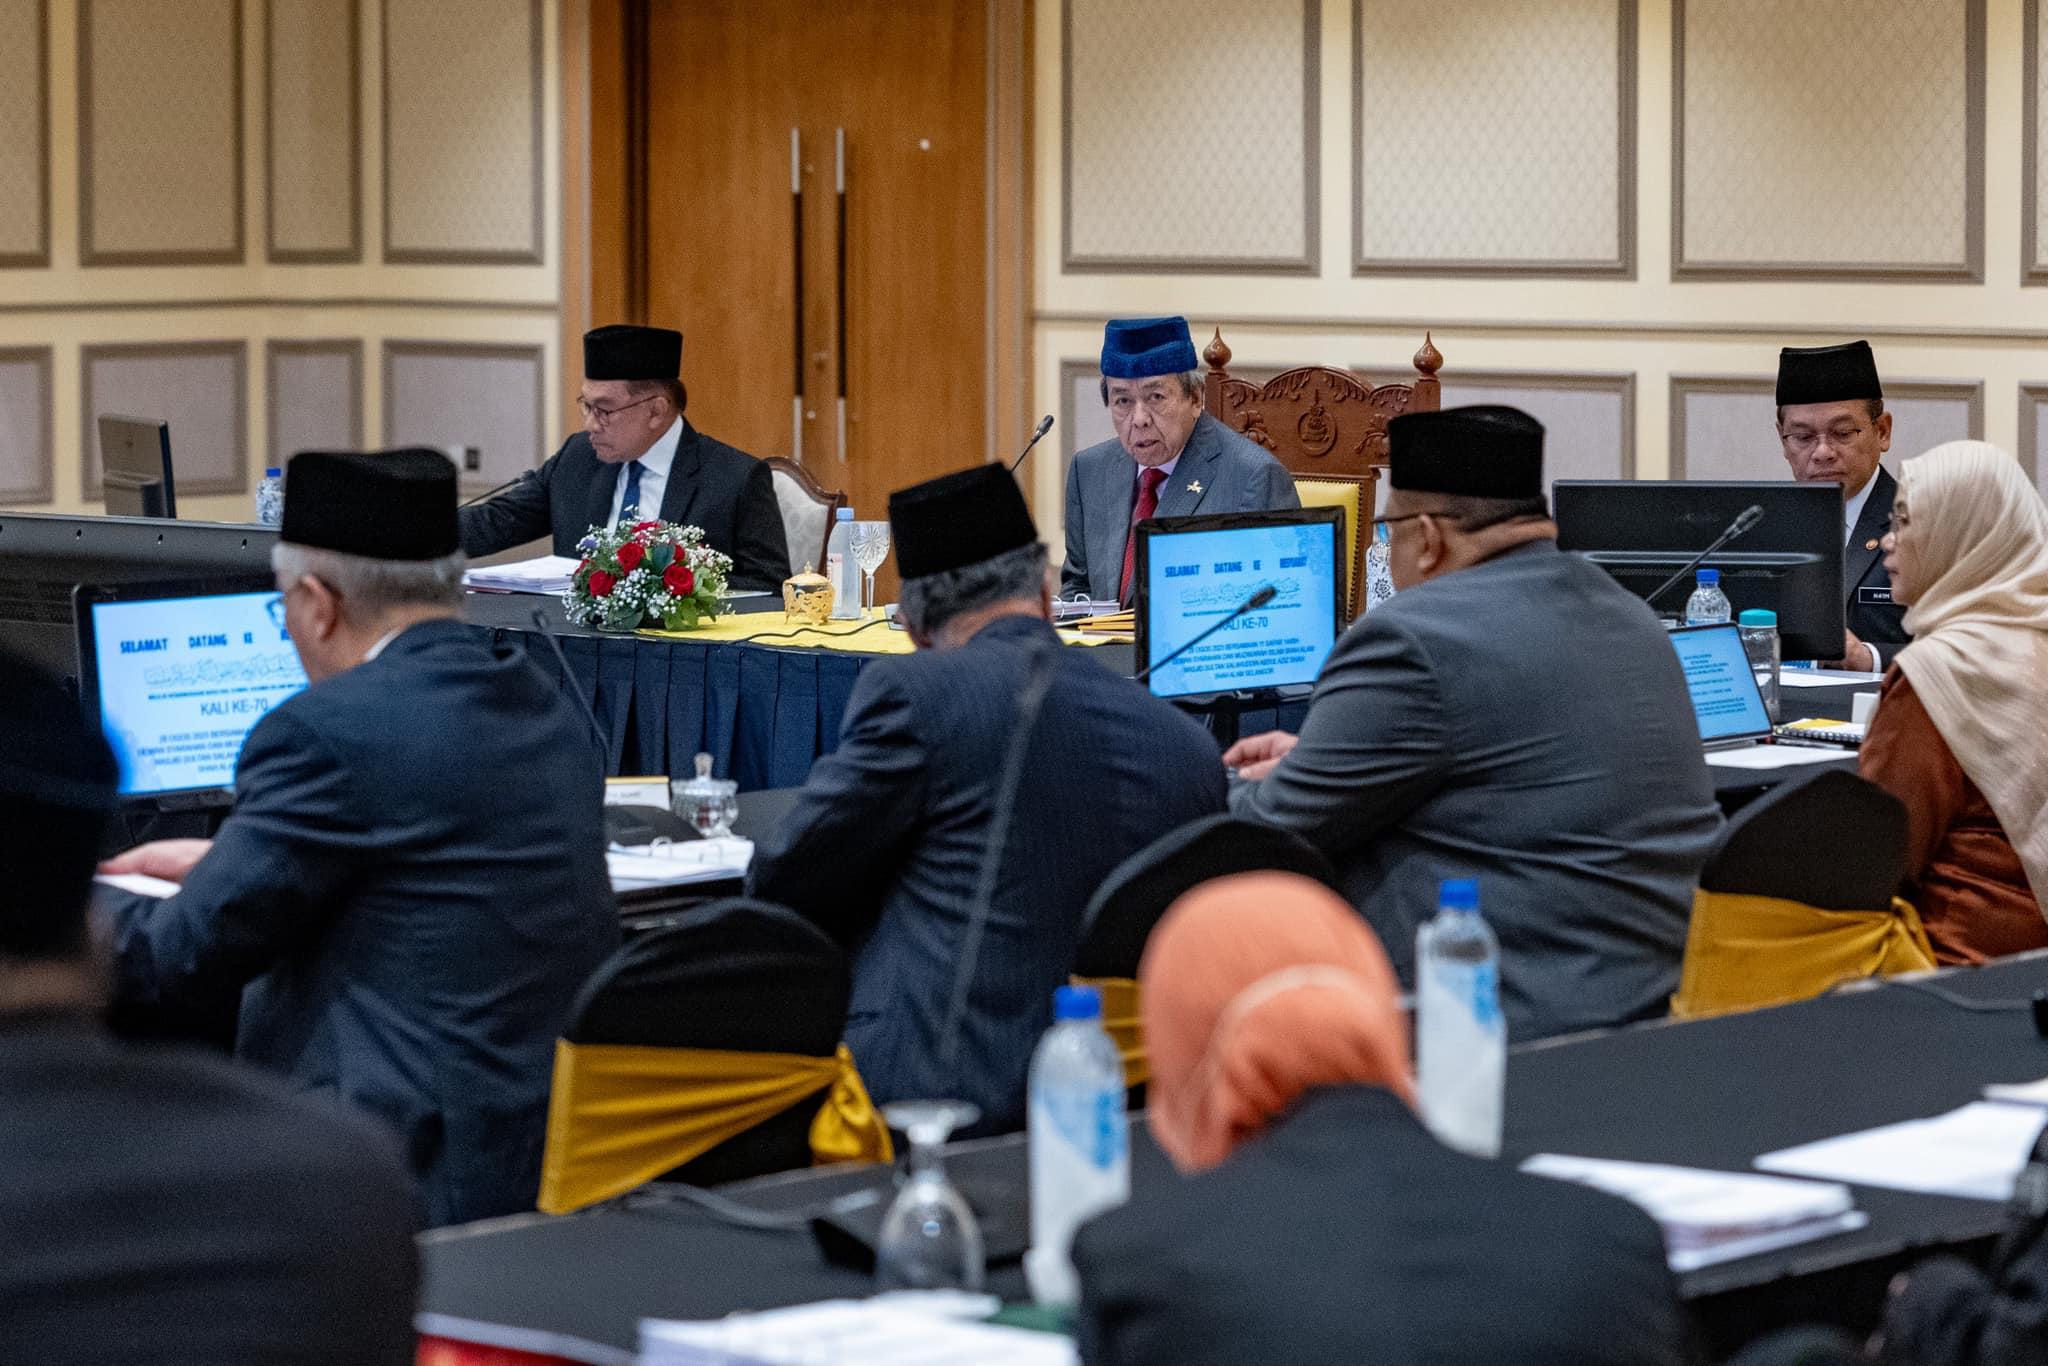 National Council for Islamic Religious Affairs discusses ‘Kalimah Allah’ issue